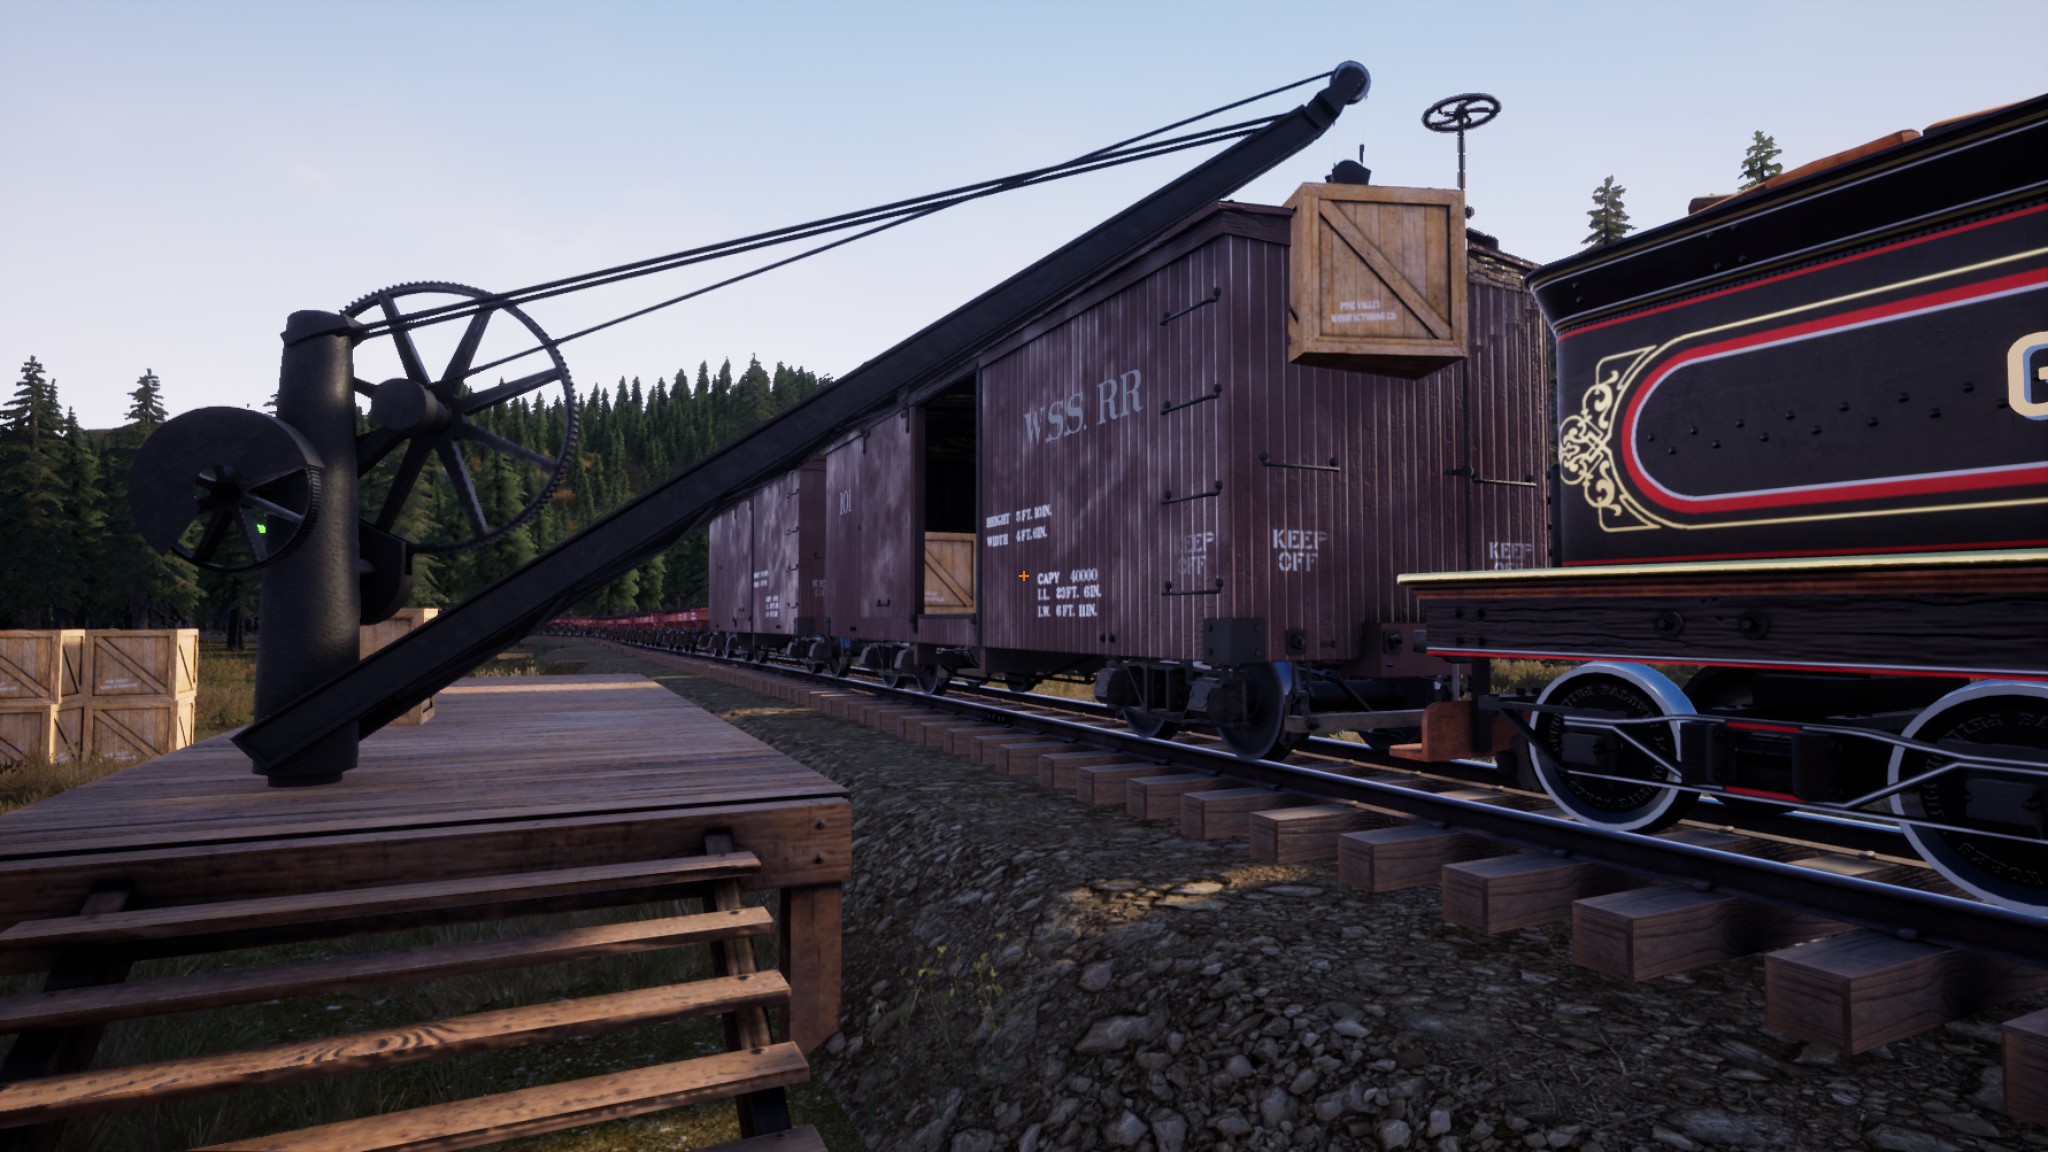 Boxcar Loading Platform: How to Build Your Rail image 5